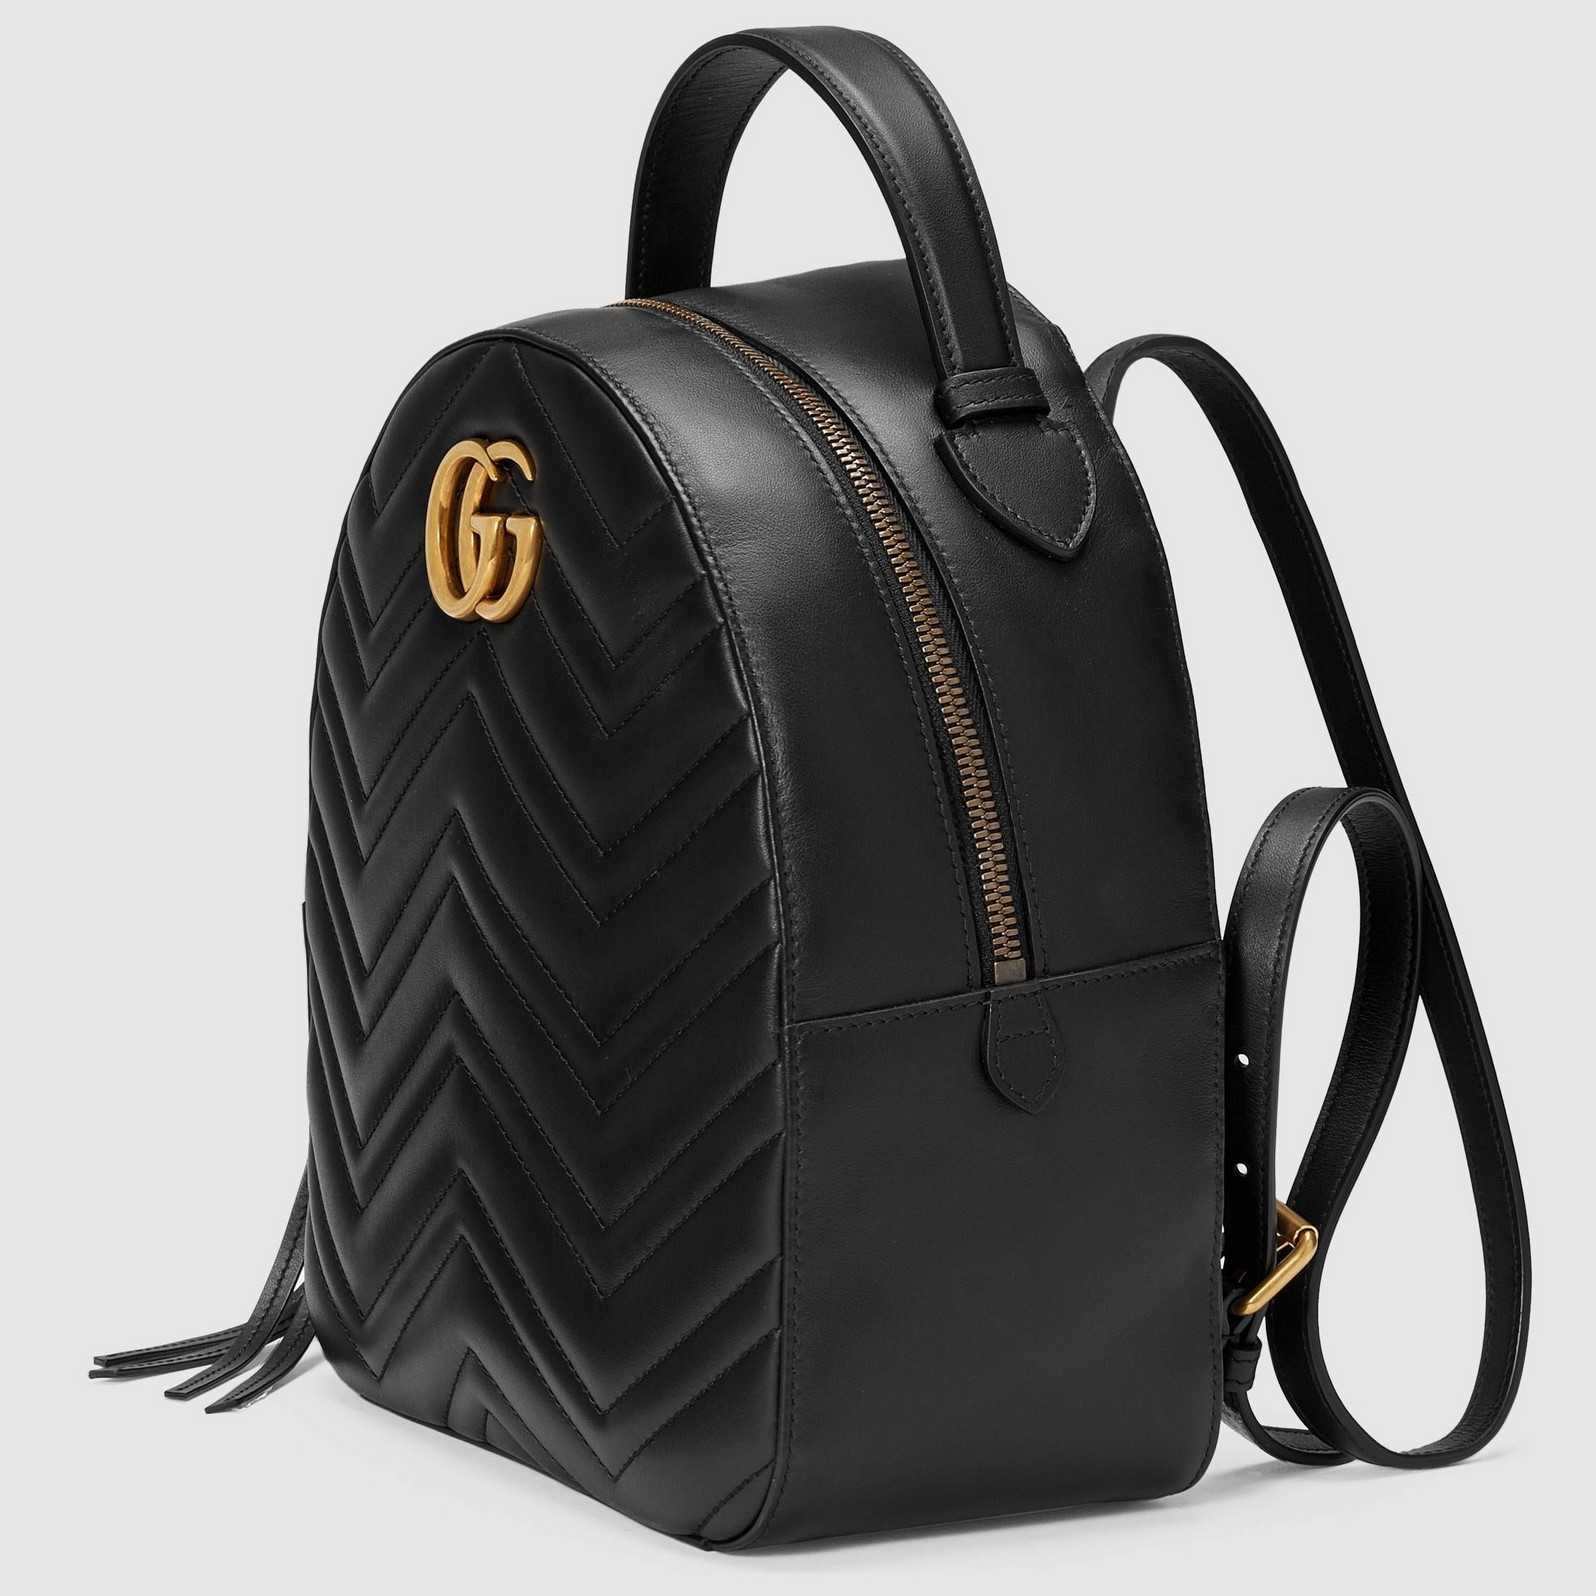 BALO NỮ GUCCI MARMONT BACKPACK 9